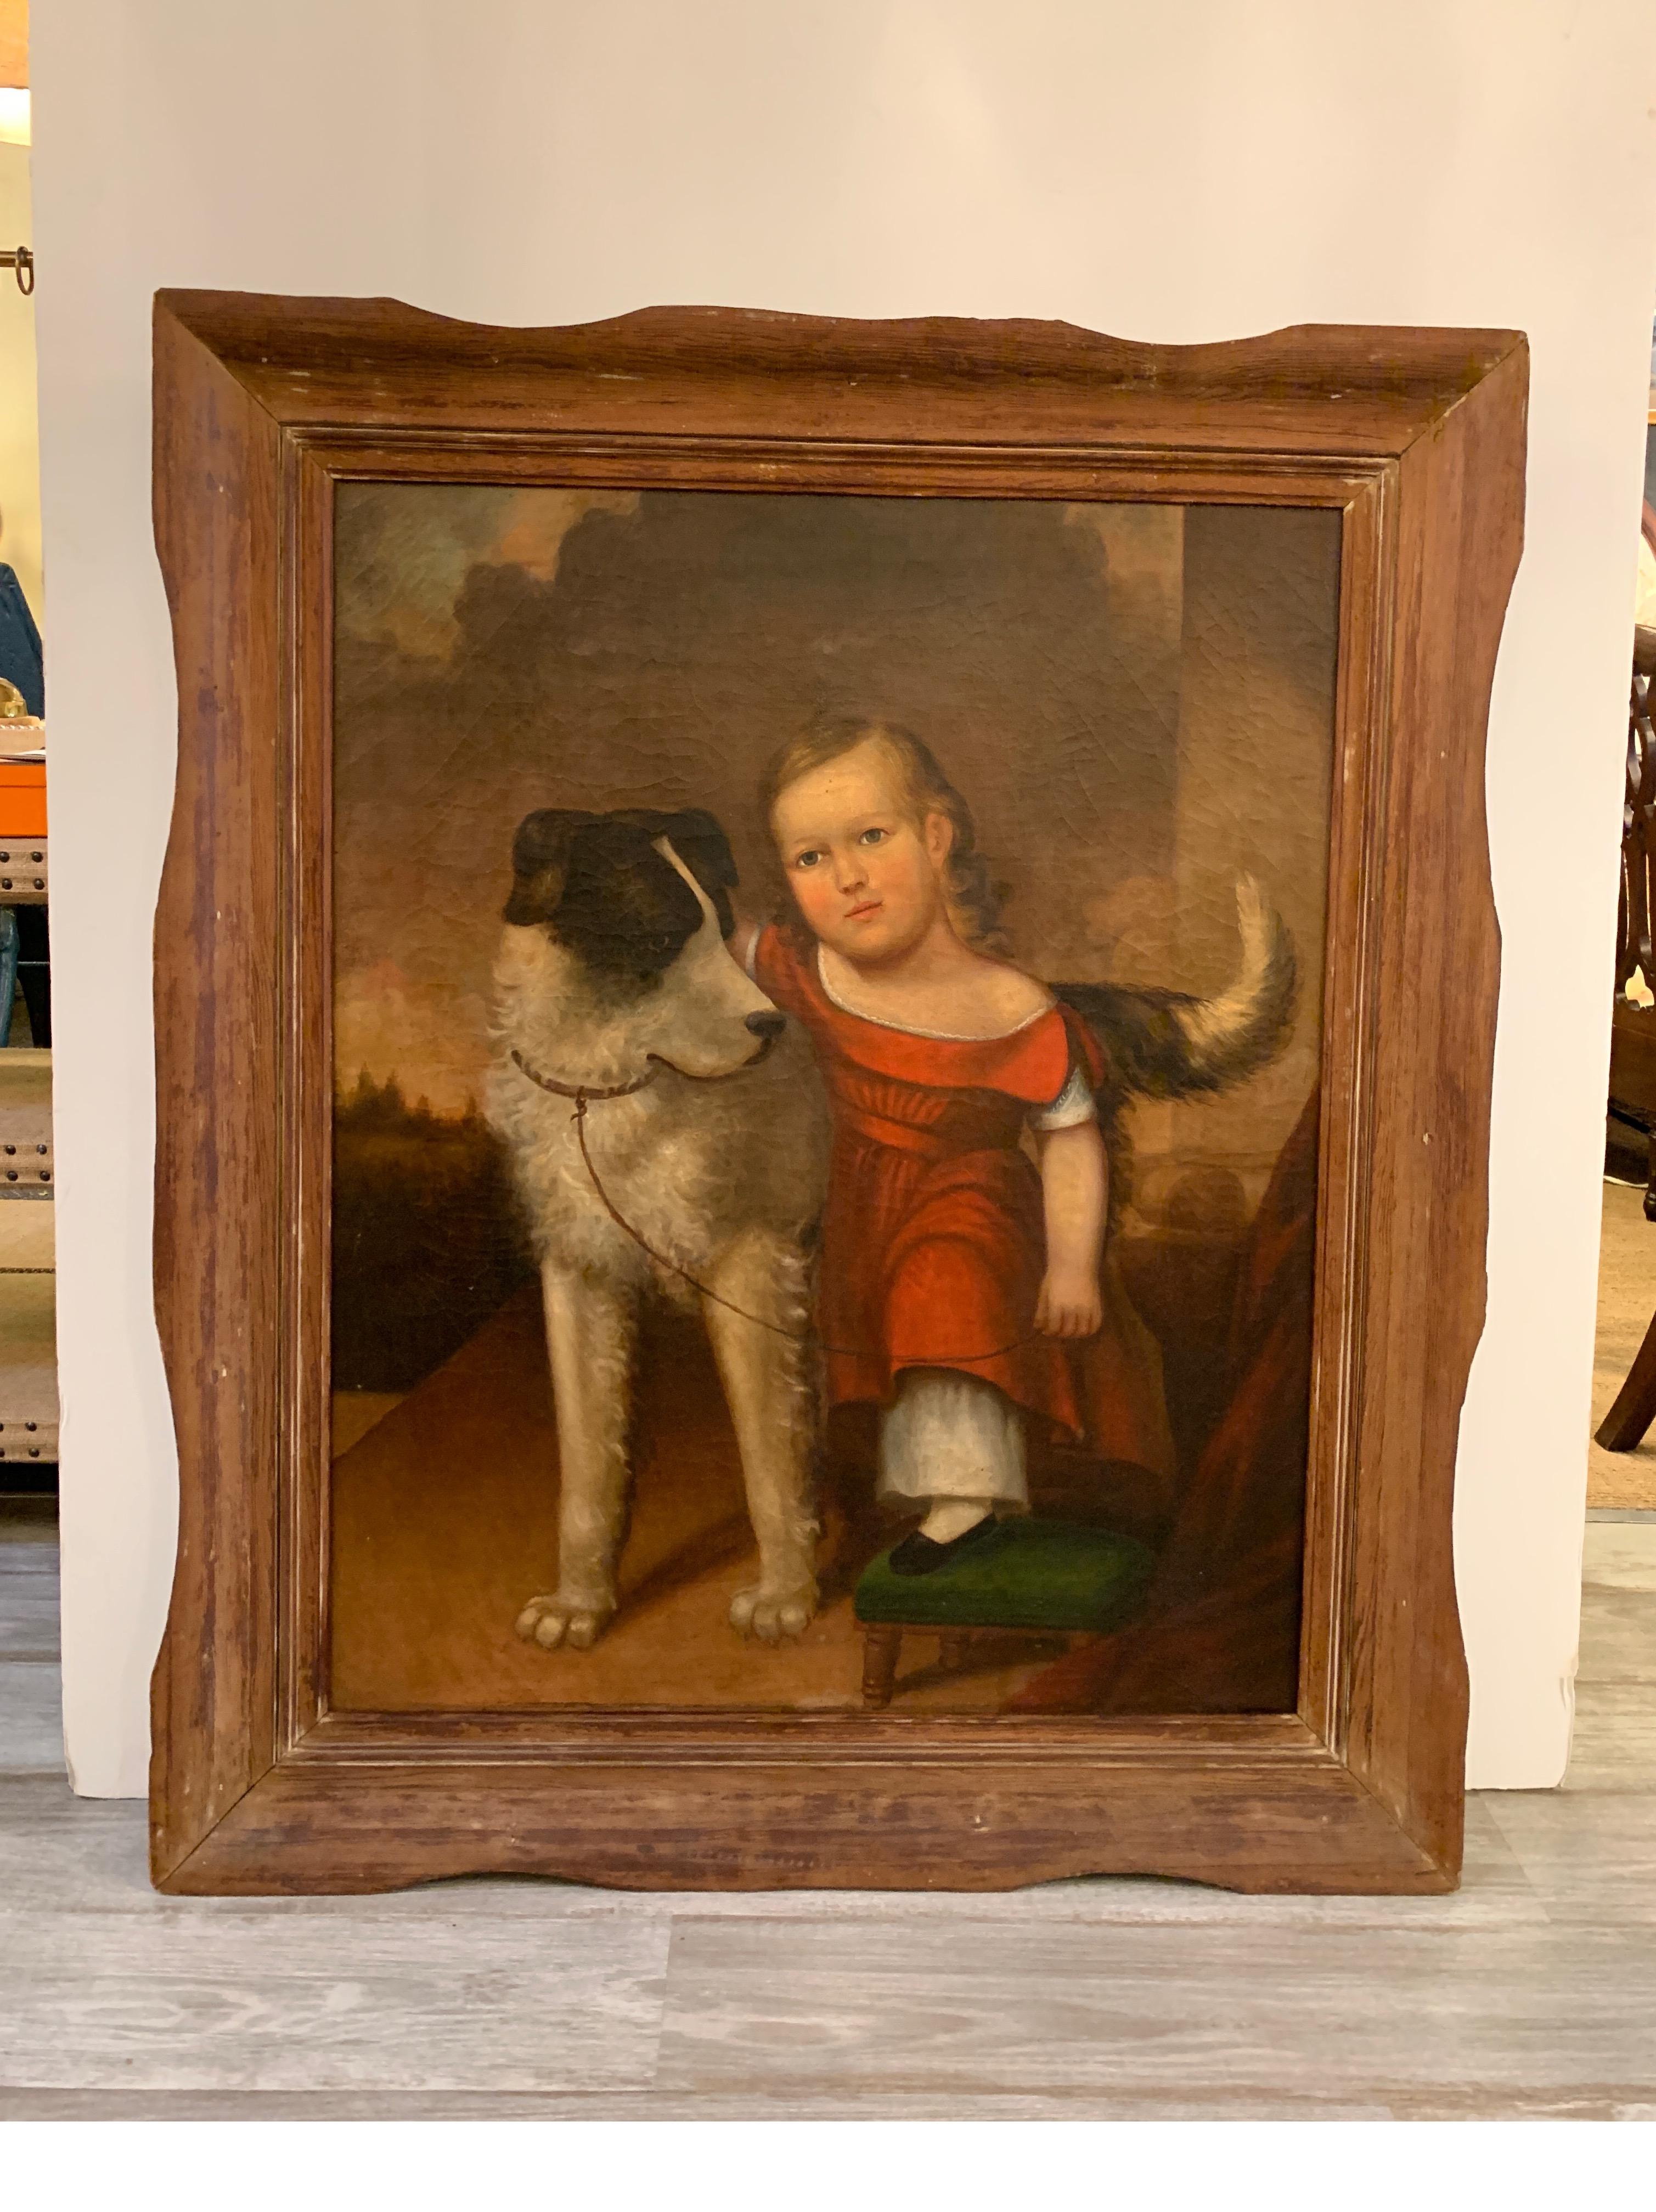 American Early 19th Century Oil on Canvas of Child with Dog